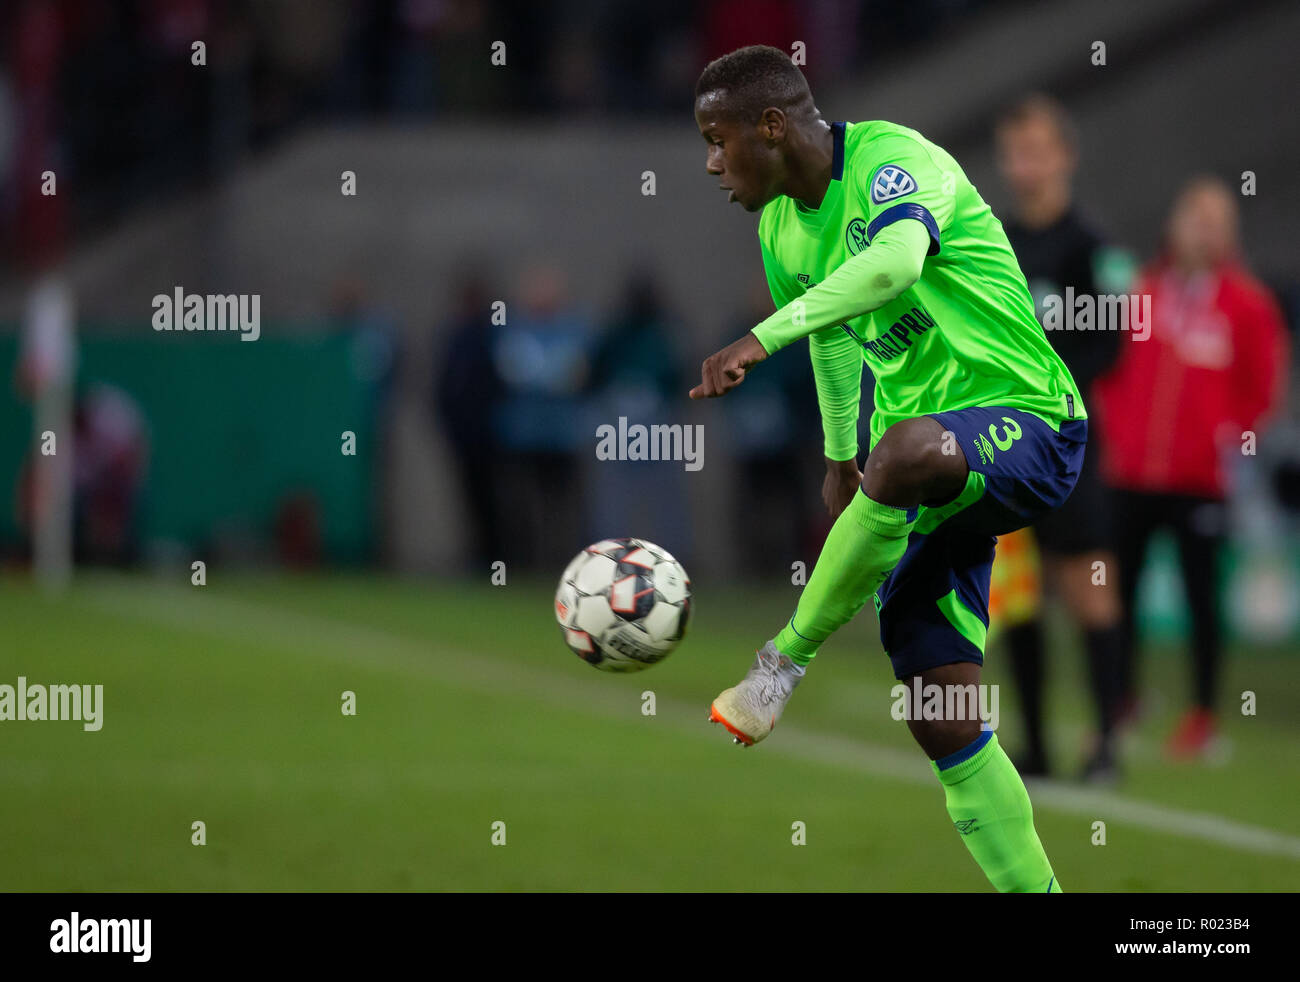 Cologne, Germany October 31 2018, DFB Pokal, FC Koeln - FC Schalke 04: Hamza Mendyl (S04) in action.                 Credit: Juergen Schwarz/Alamy Live News    DFB REGULATIONS PROHIBIT ANY USE OF PHOTOGRAPHS AS IMAGE SEQUENCES AND/OR QUASI-VIDEO Credit: Juergen Schwarz/Alamy Live News Stock Photo